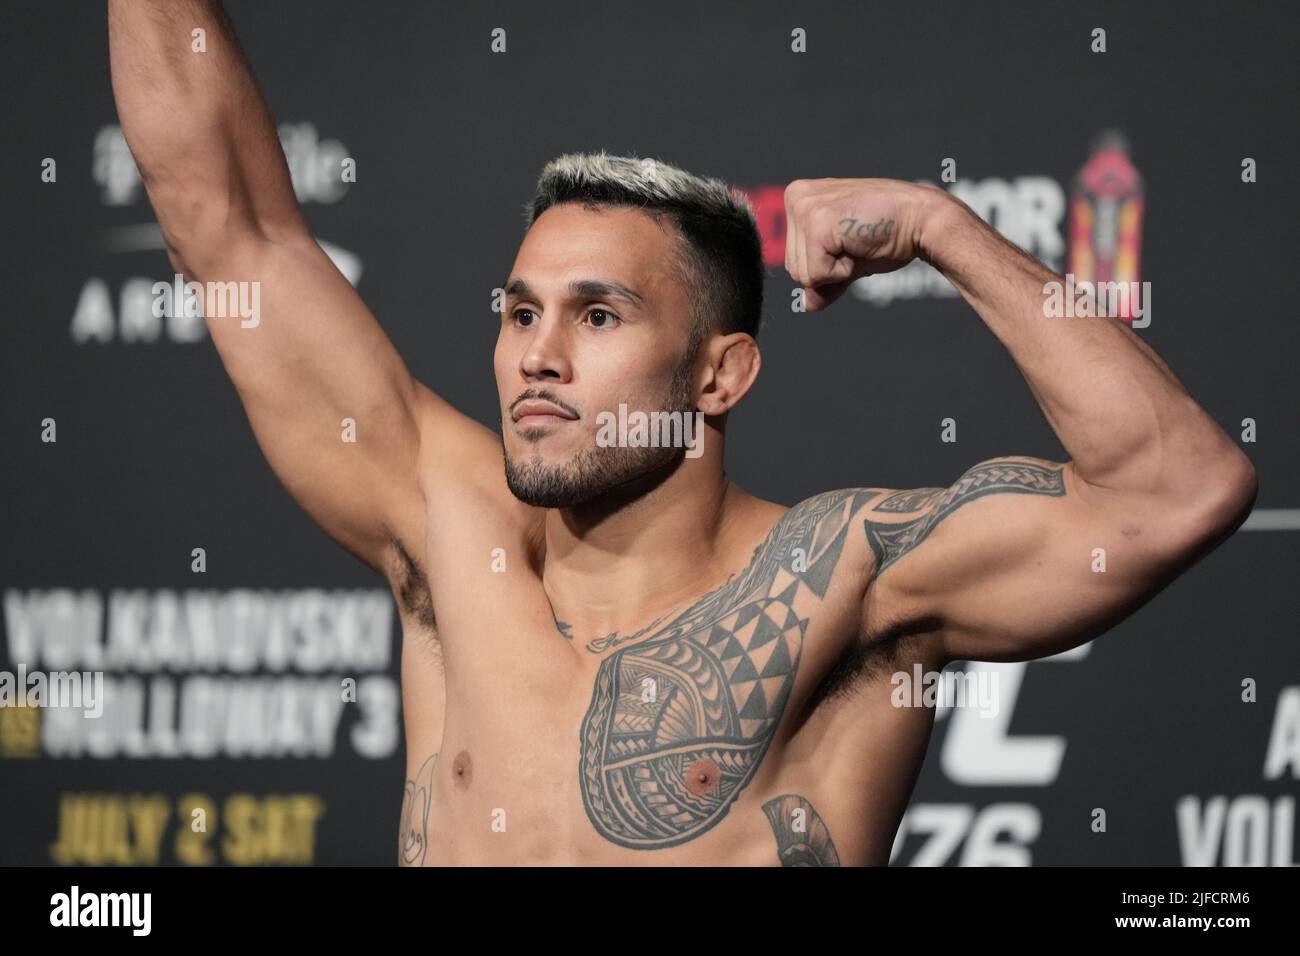 https://c8.alamy.com/comp/2JFCRM6/las-vegas-usa-30th-june-2022-las-vegas-nv-june-1-brad-tavares-steps-on-the-scale-for-the-official-weigh-ins-at-t-mobile-arena-for-ufc-276-on-july-1-2022-in-las-vegas-nv-united-states-photo-by-louis-grassepximages-credit-px-imagesalamy-live-news-2JFCRM6.jpg